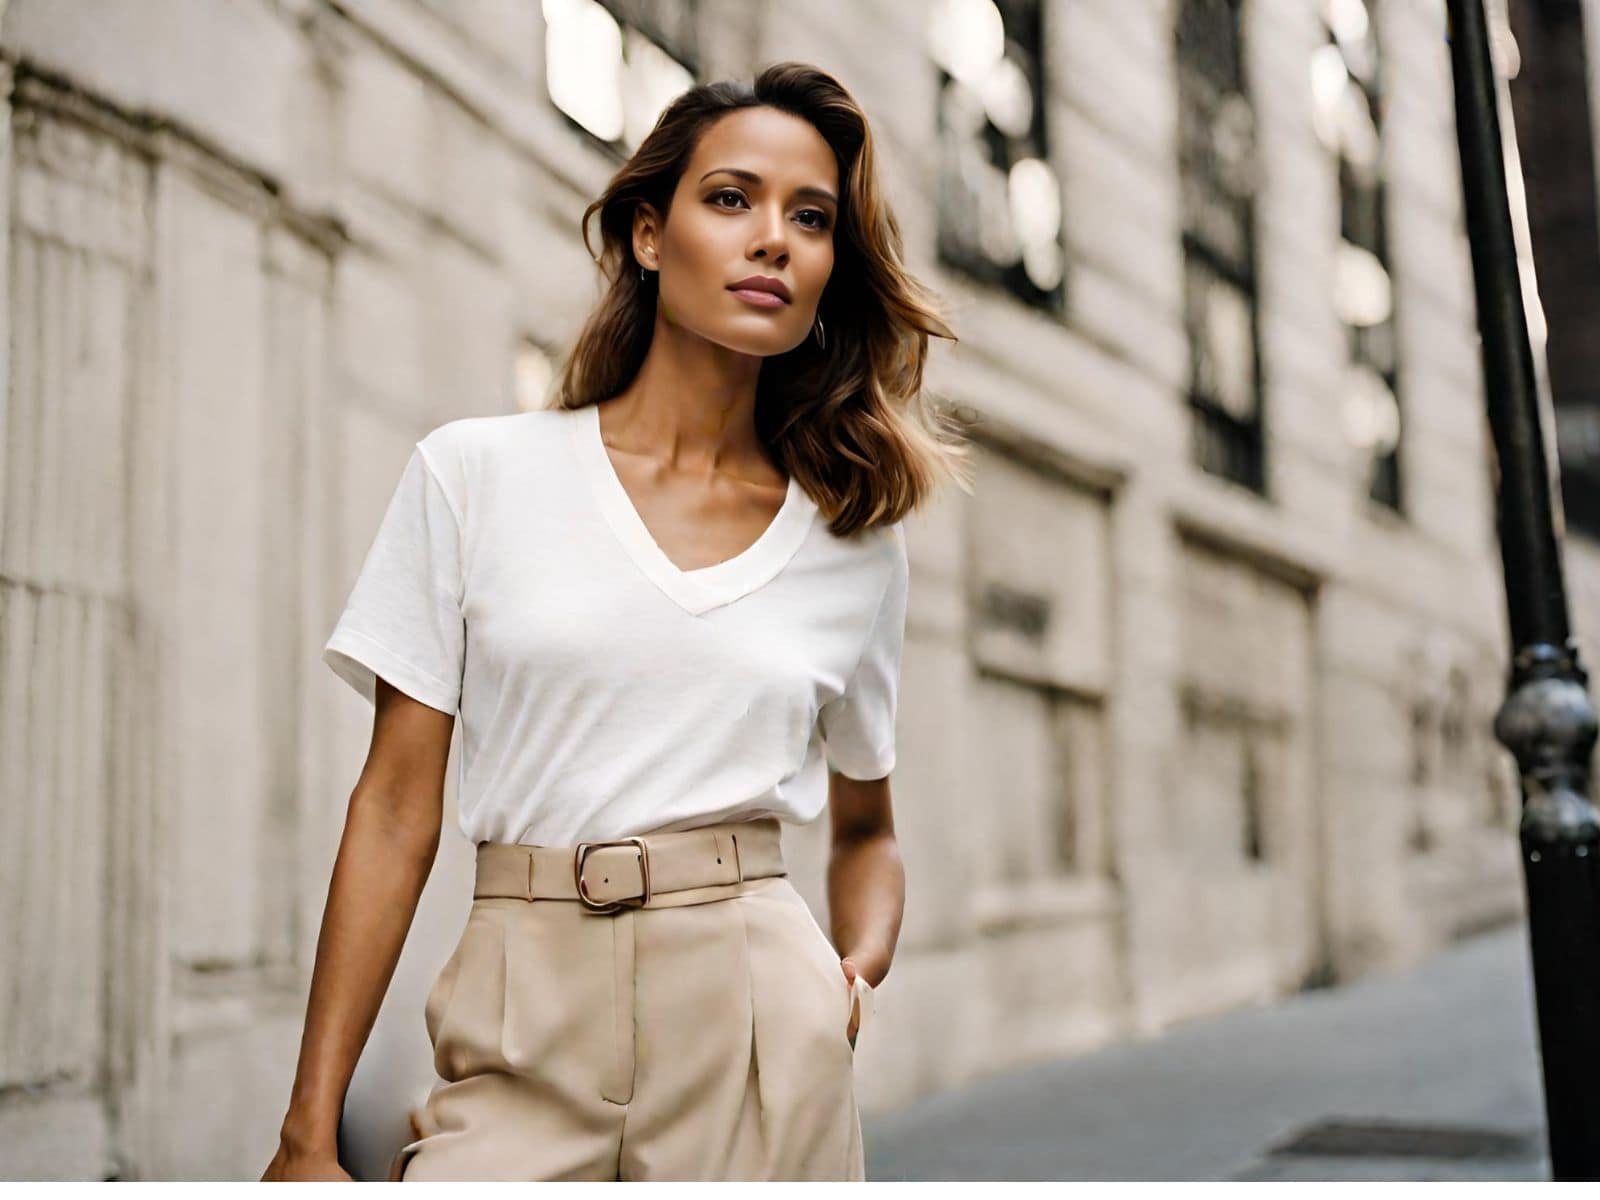 <p>White T-shirt is a wardrobe essential we all have, but did you know there are many different fun and stylish ways to wear it? We got 25 chic outfit ideas for you with a simple white T-shirt. Try them today!</p>